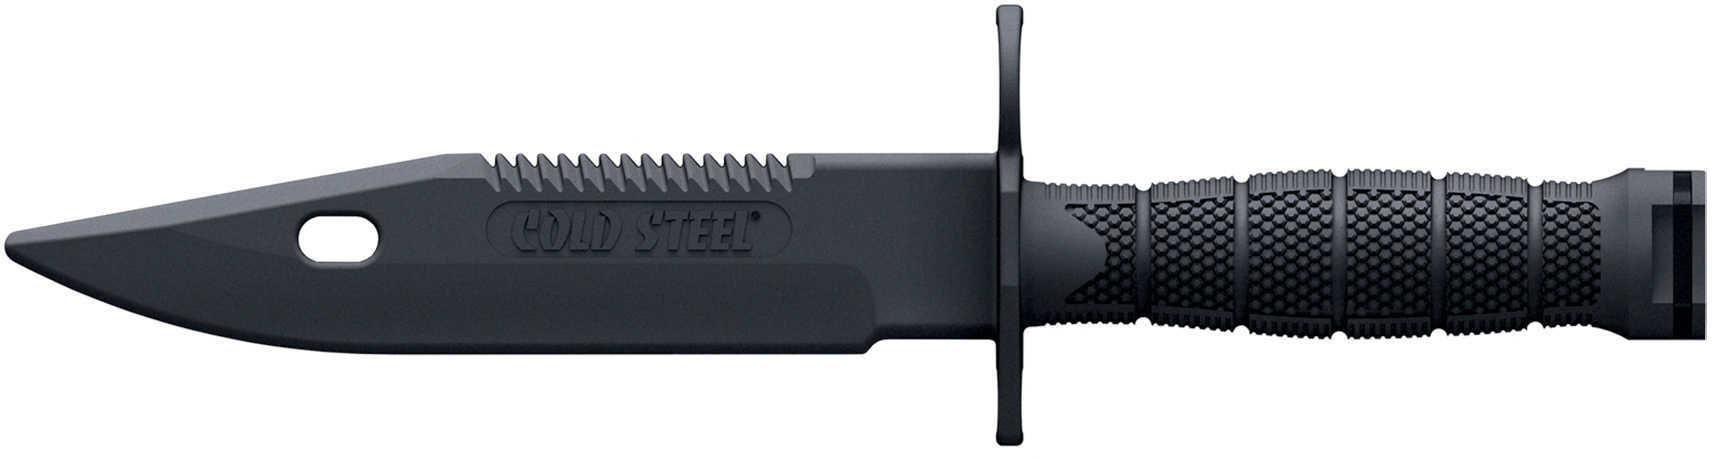 Cold Steel Rubber Training M9 Bayonet Md: 92RBNT